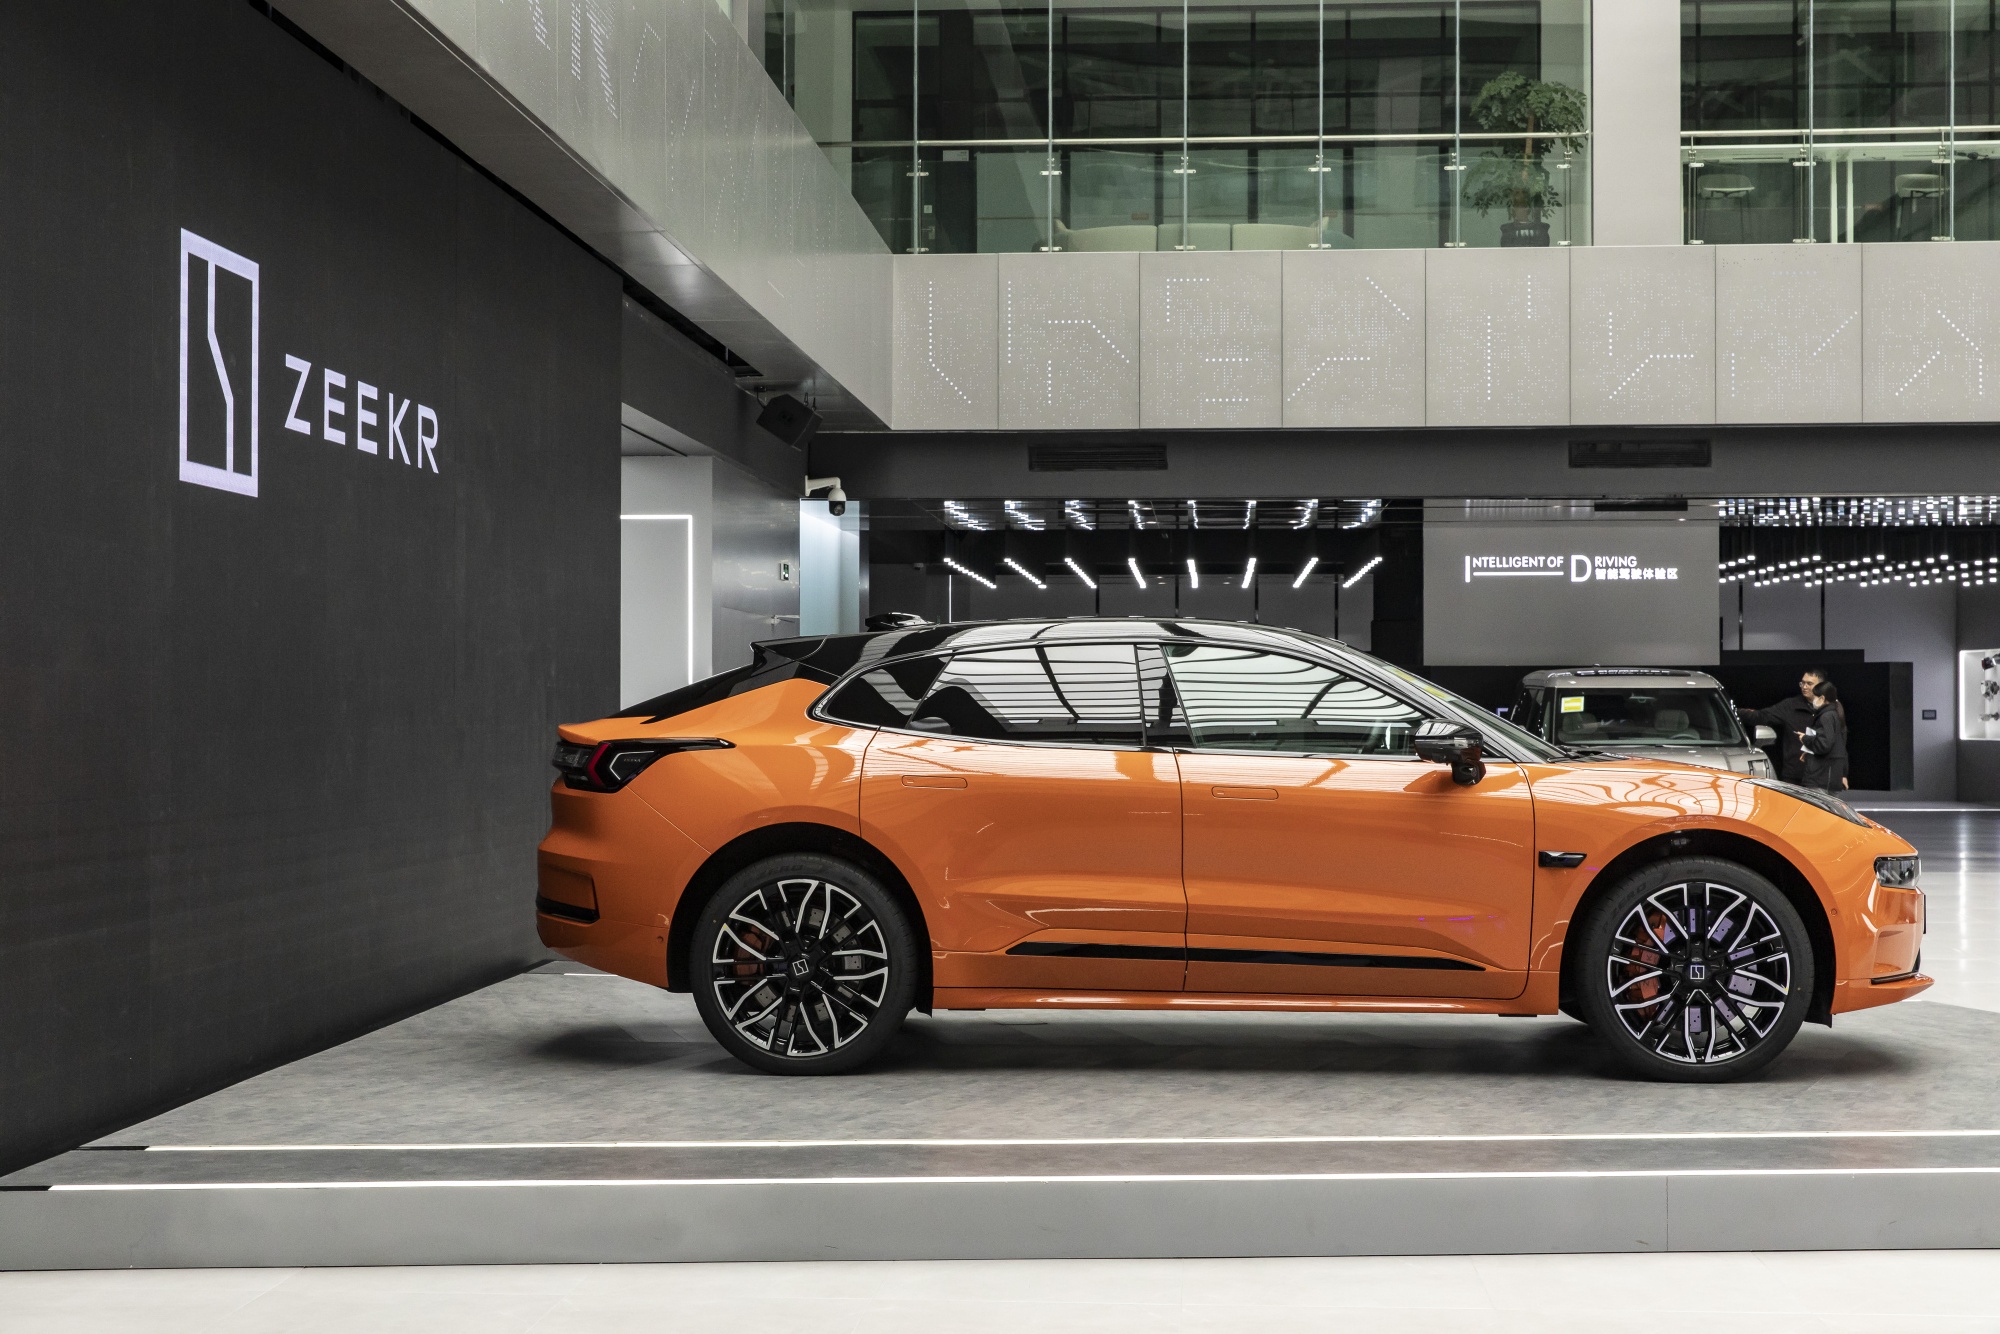 Geely-owned Zeekr brand sets its sights on North America